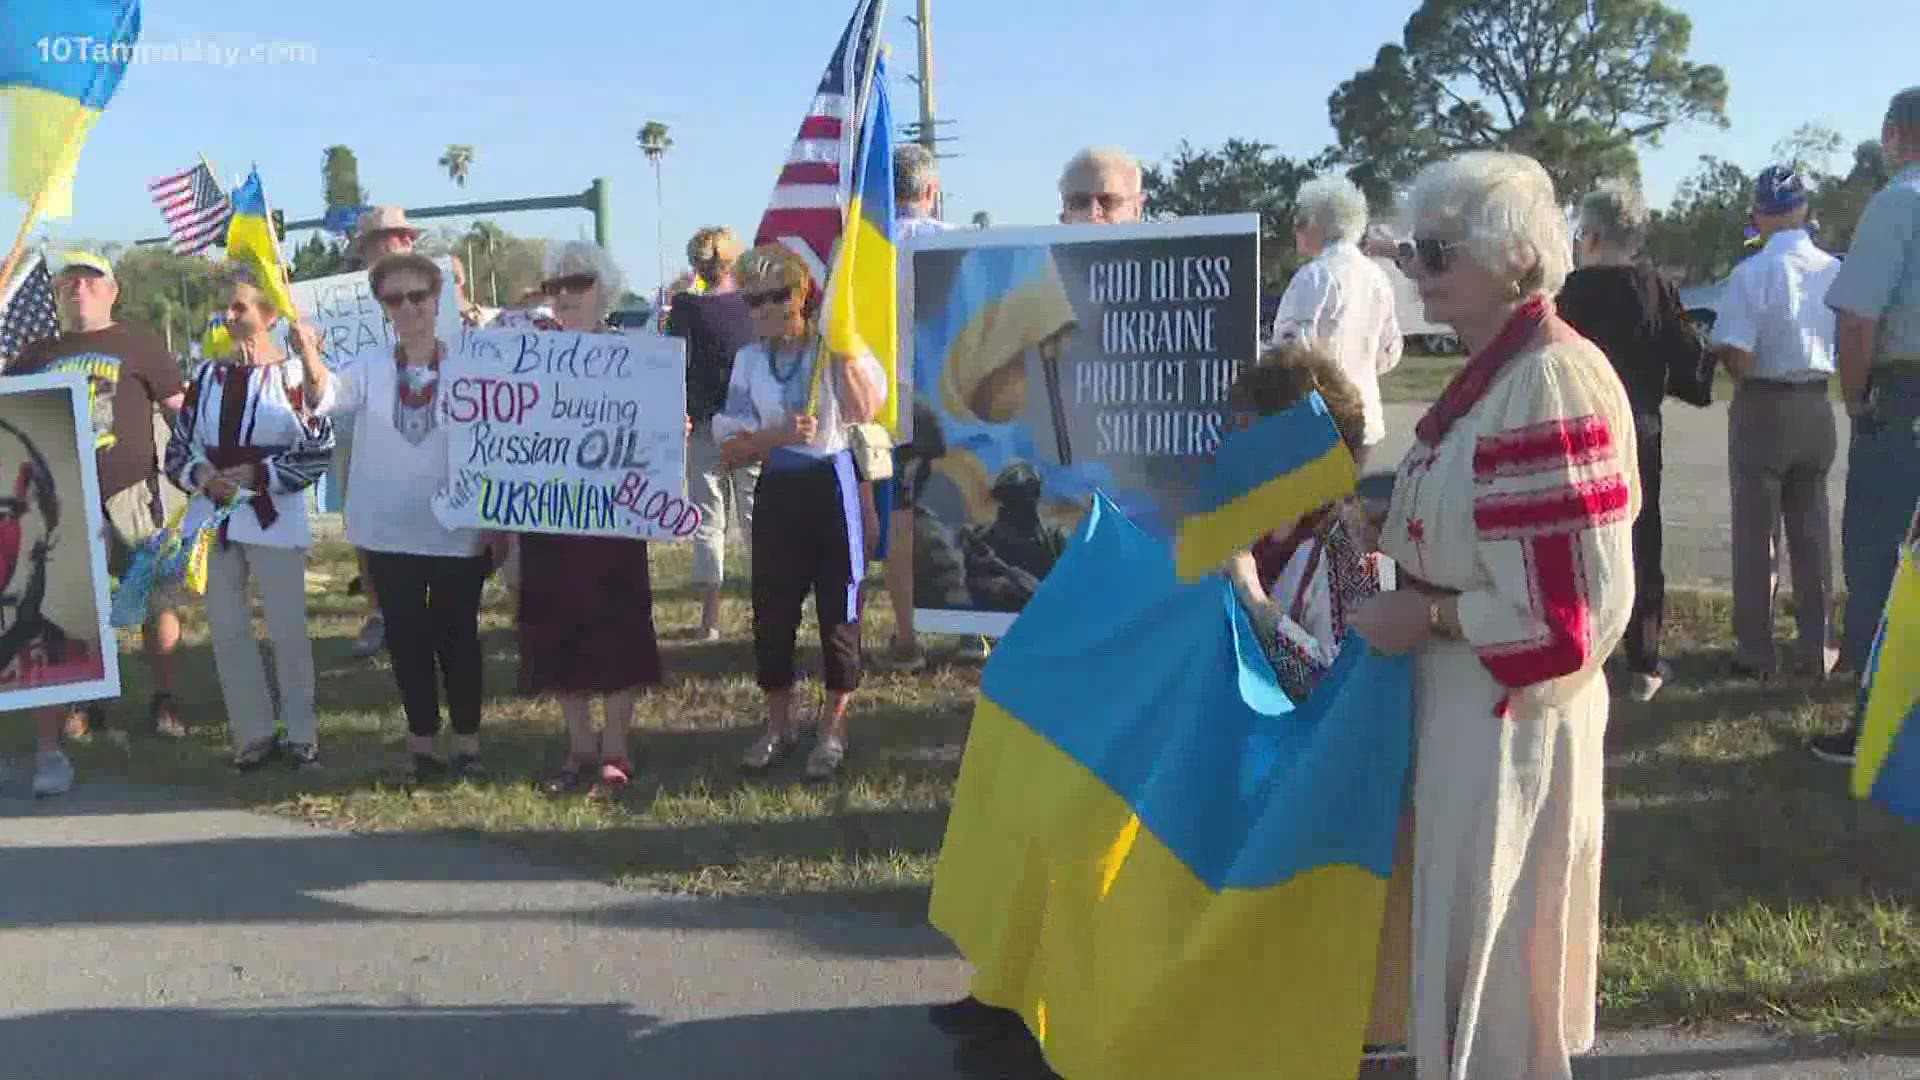 North port is home to more than 5,000 Ukrainian Americans and they are making their voices heard about what's happening overseas.